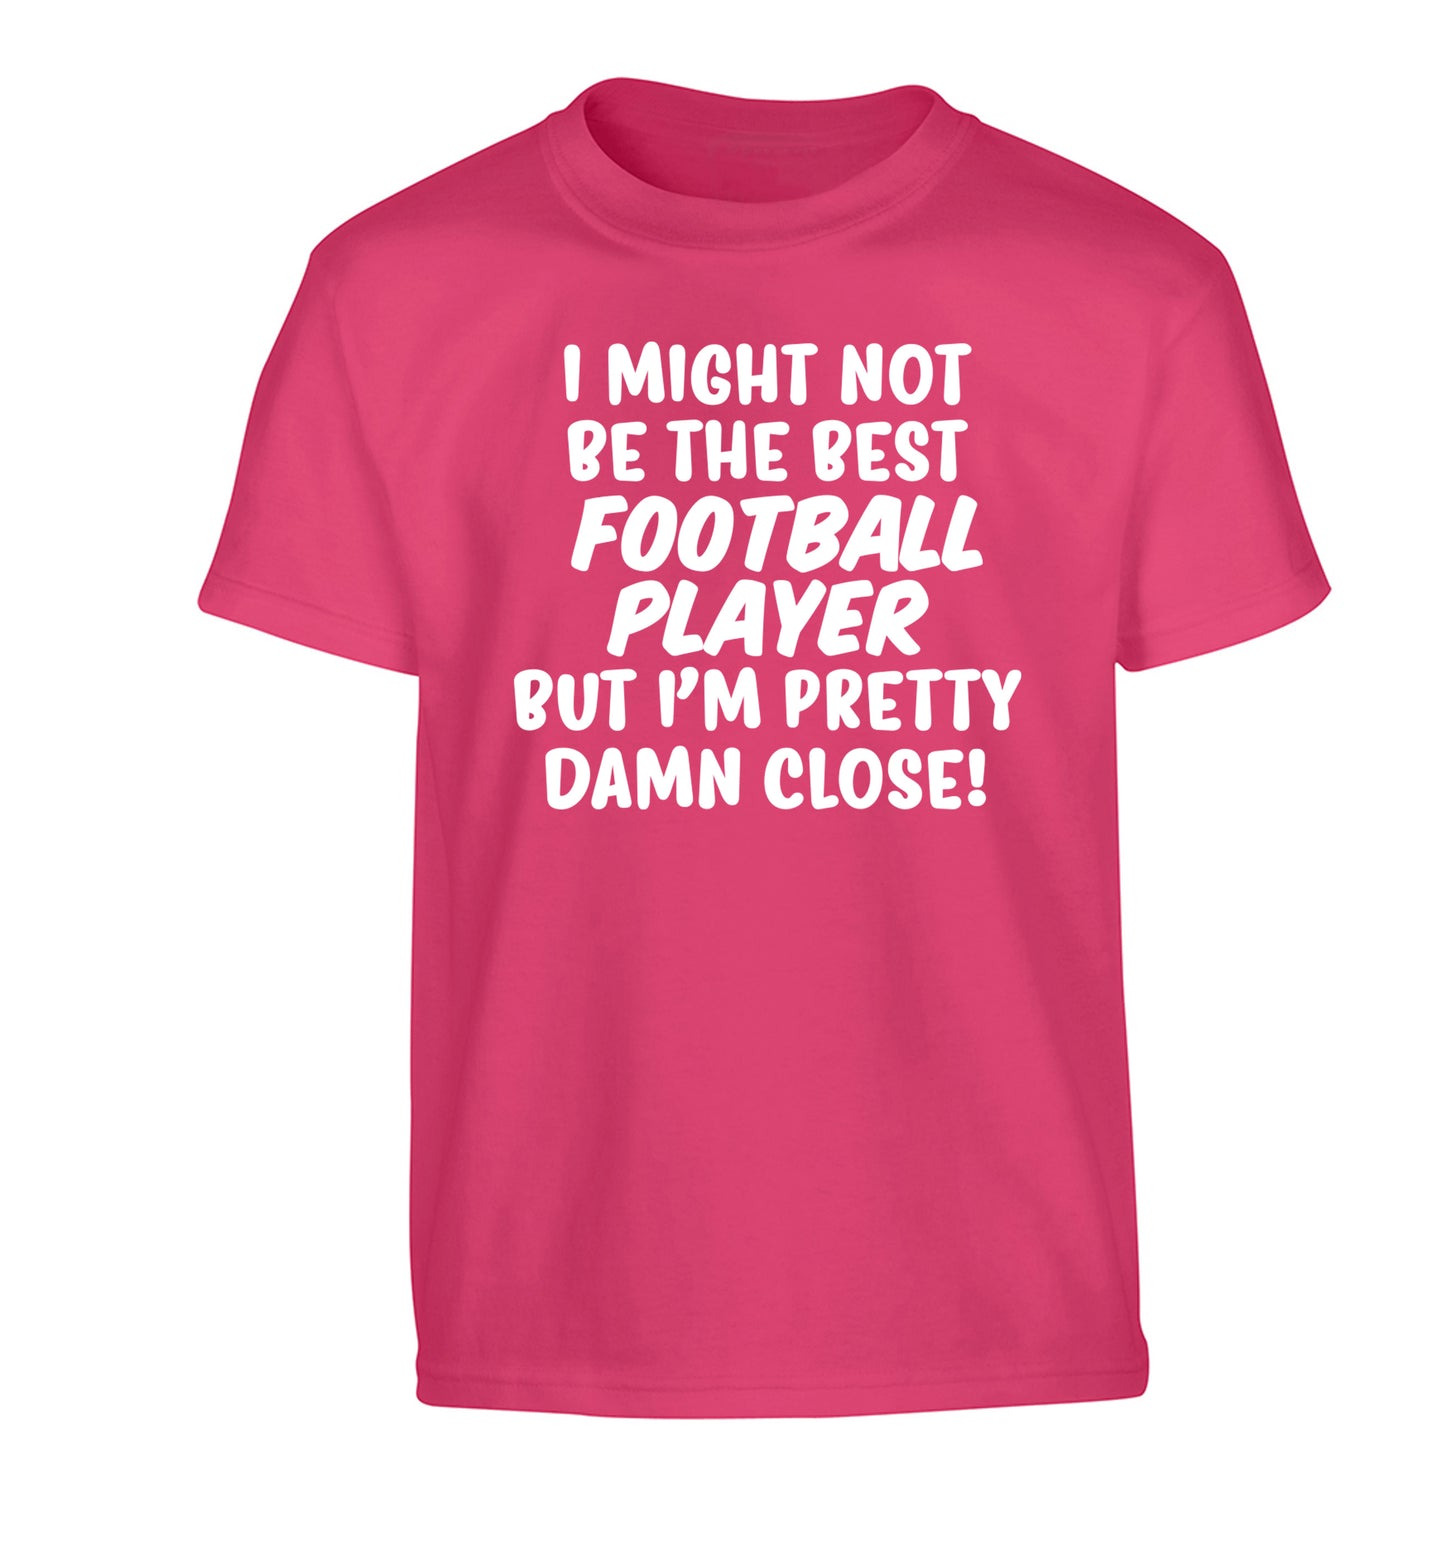 I might not be the best football player but I'm pretty close! Children's pink Tshirt 12-14 Years